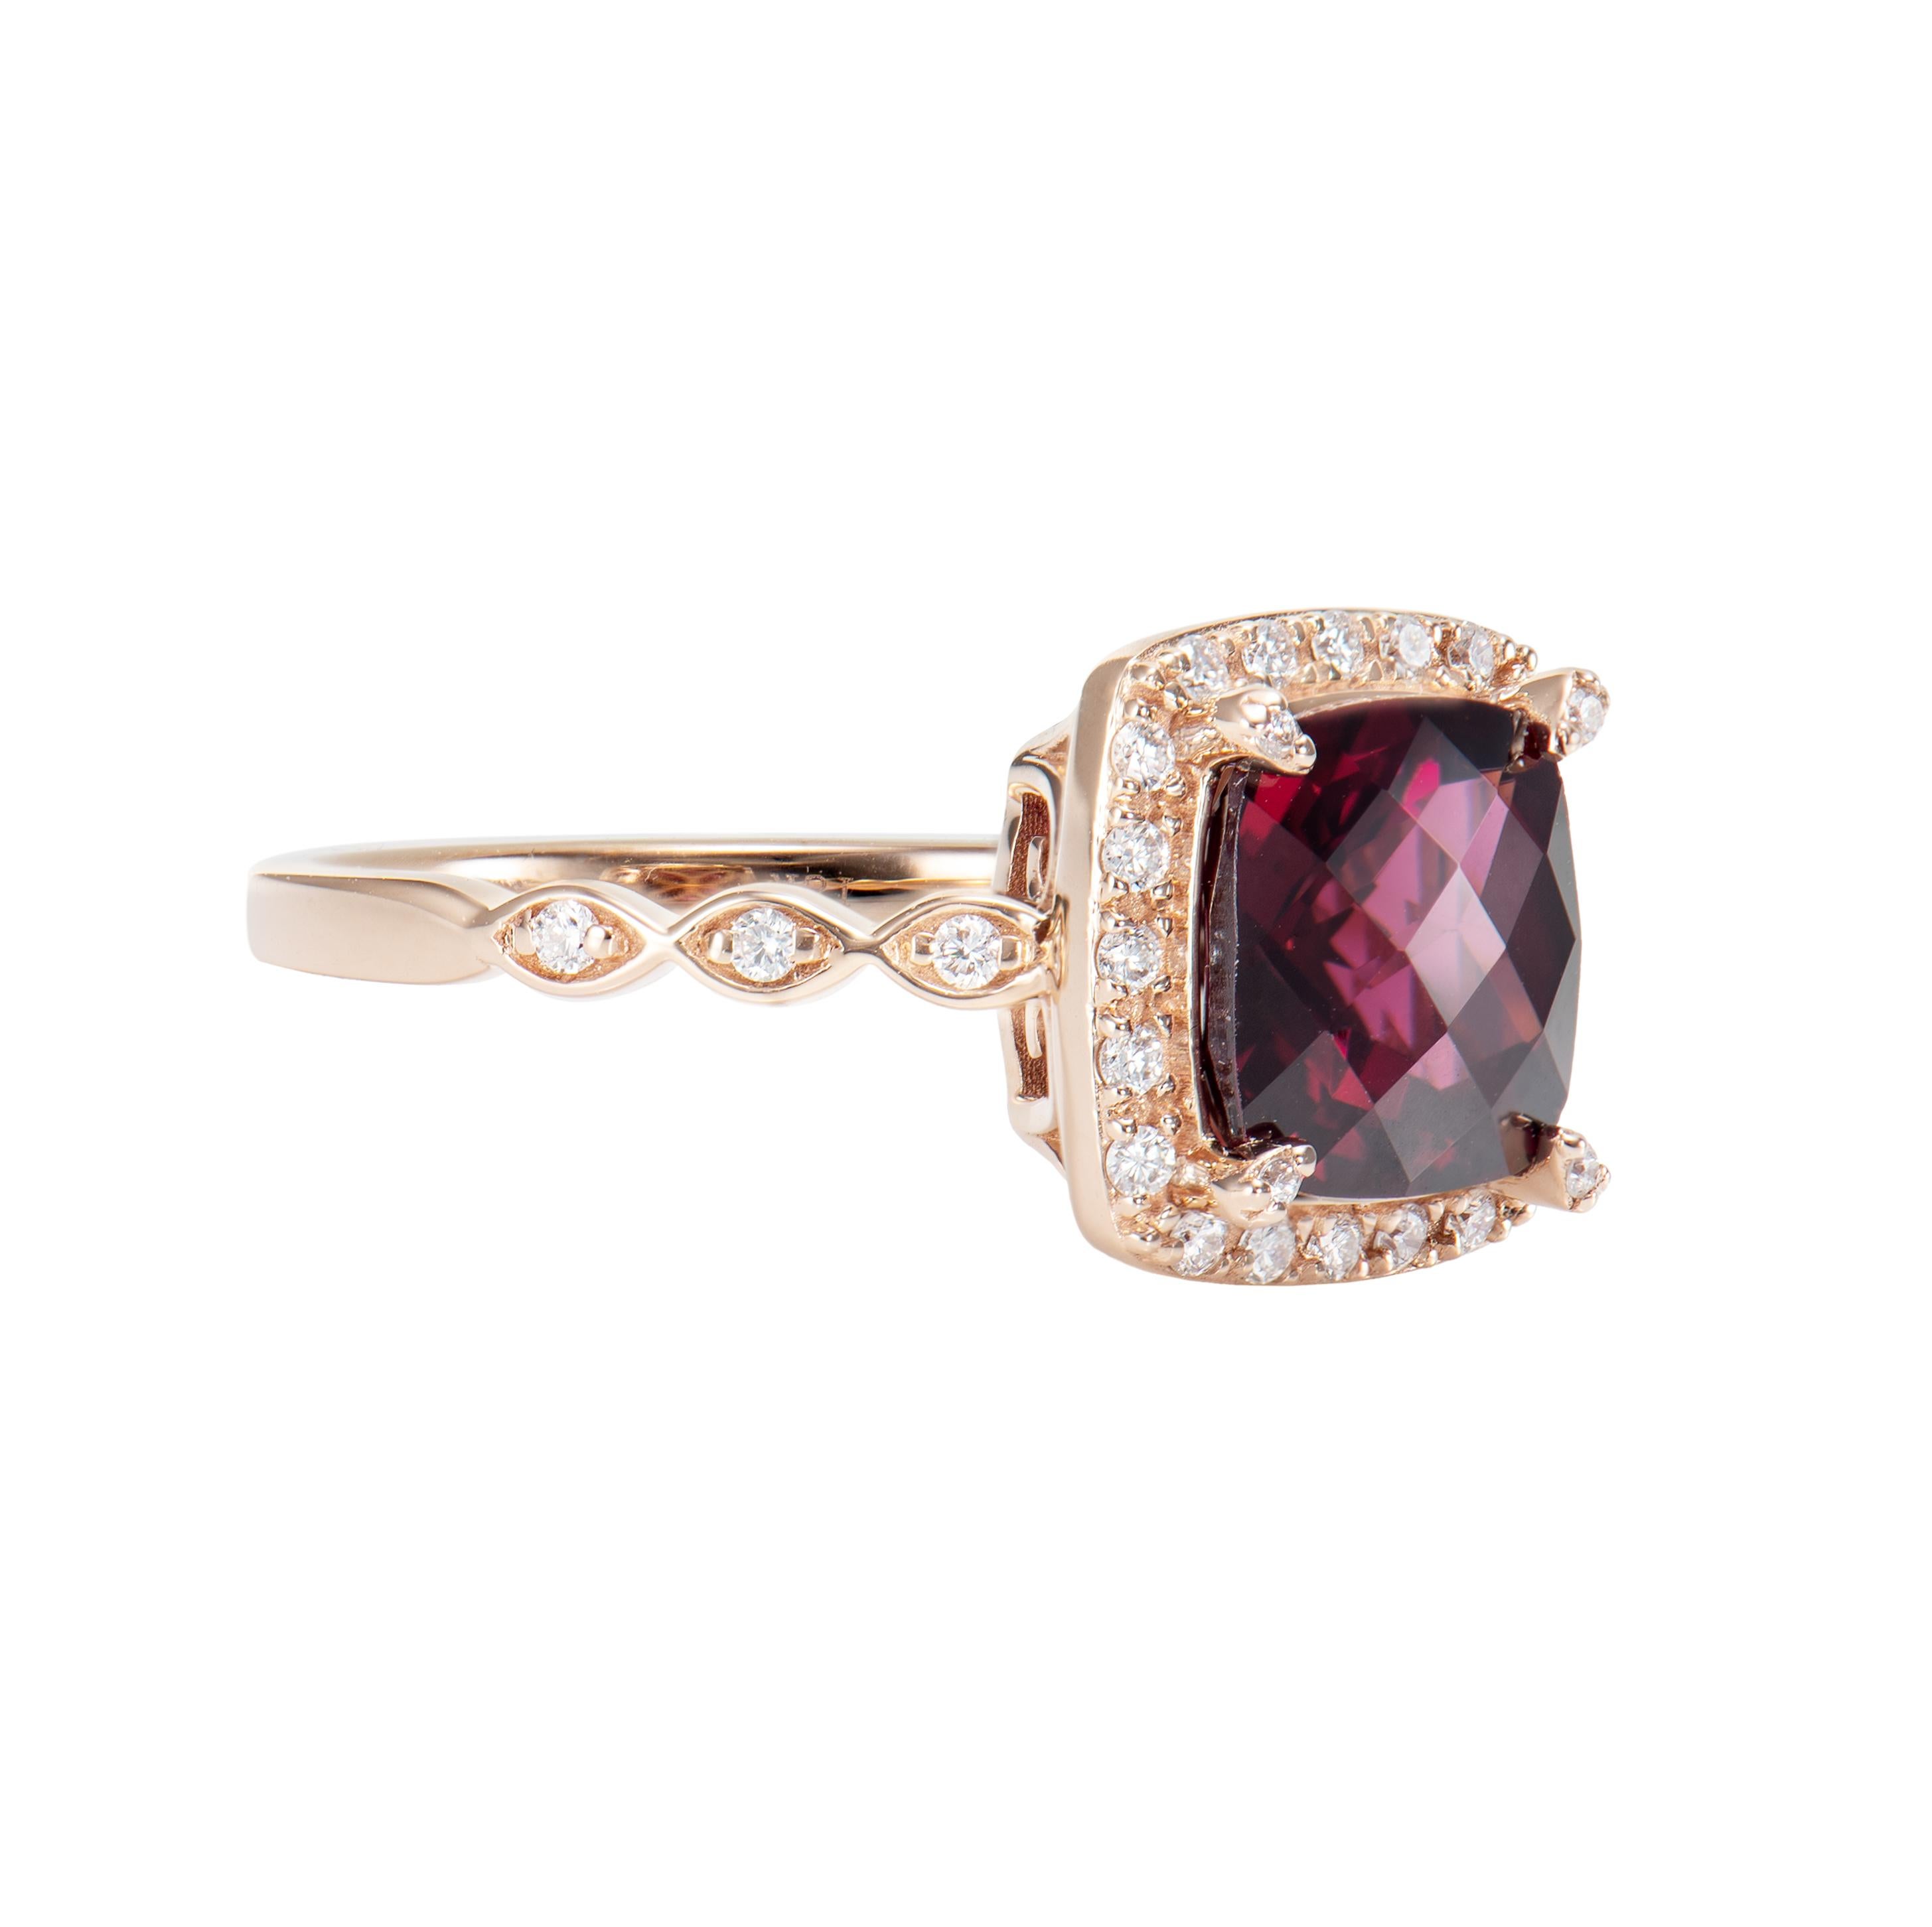 Celebrating Magenta as the color of the year for 2023, we present our exclusive Radiating Rhodolite collection. The magnificent magenta hues in these gems are brought to life in a classic rose gold setting with white diamonds.

Rhodolite and Diamond